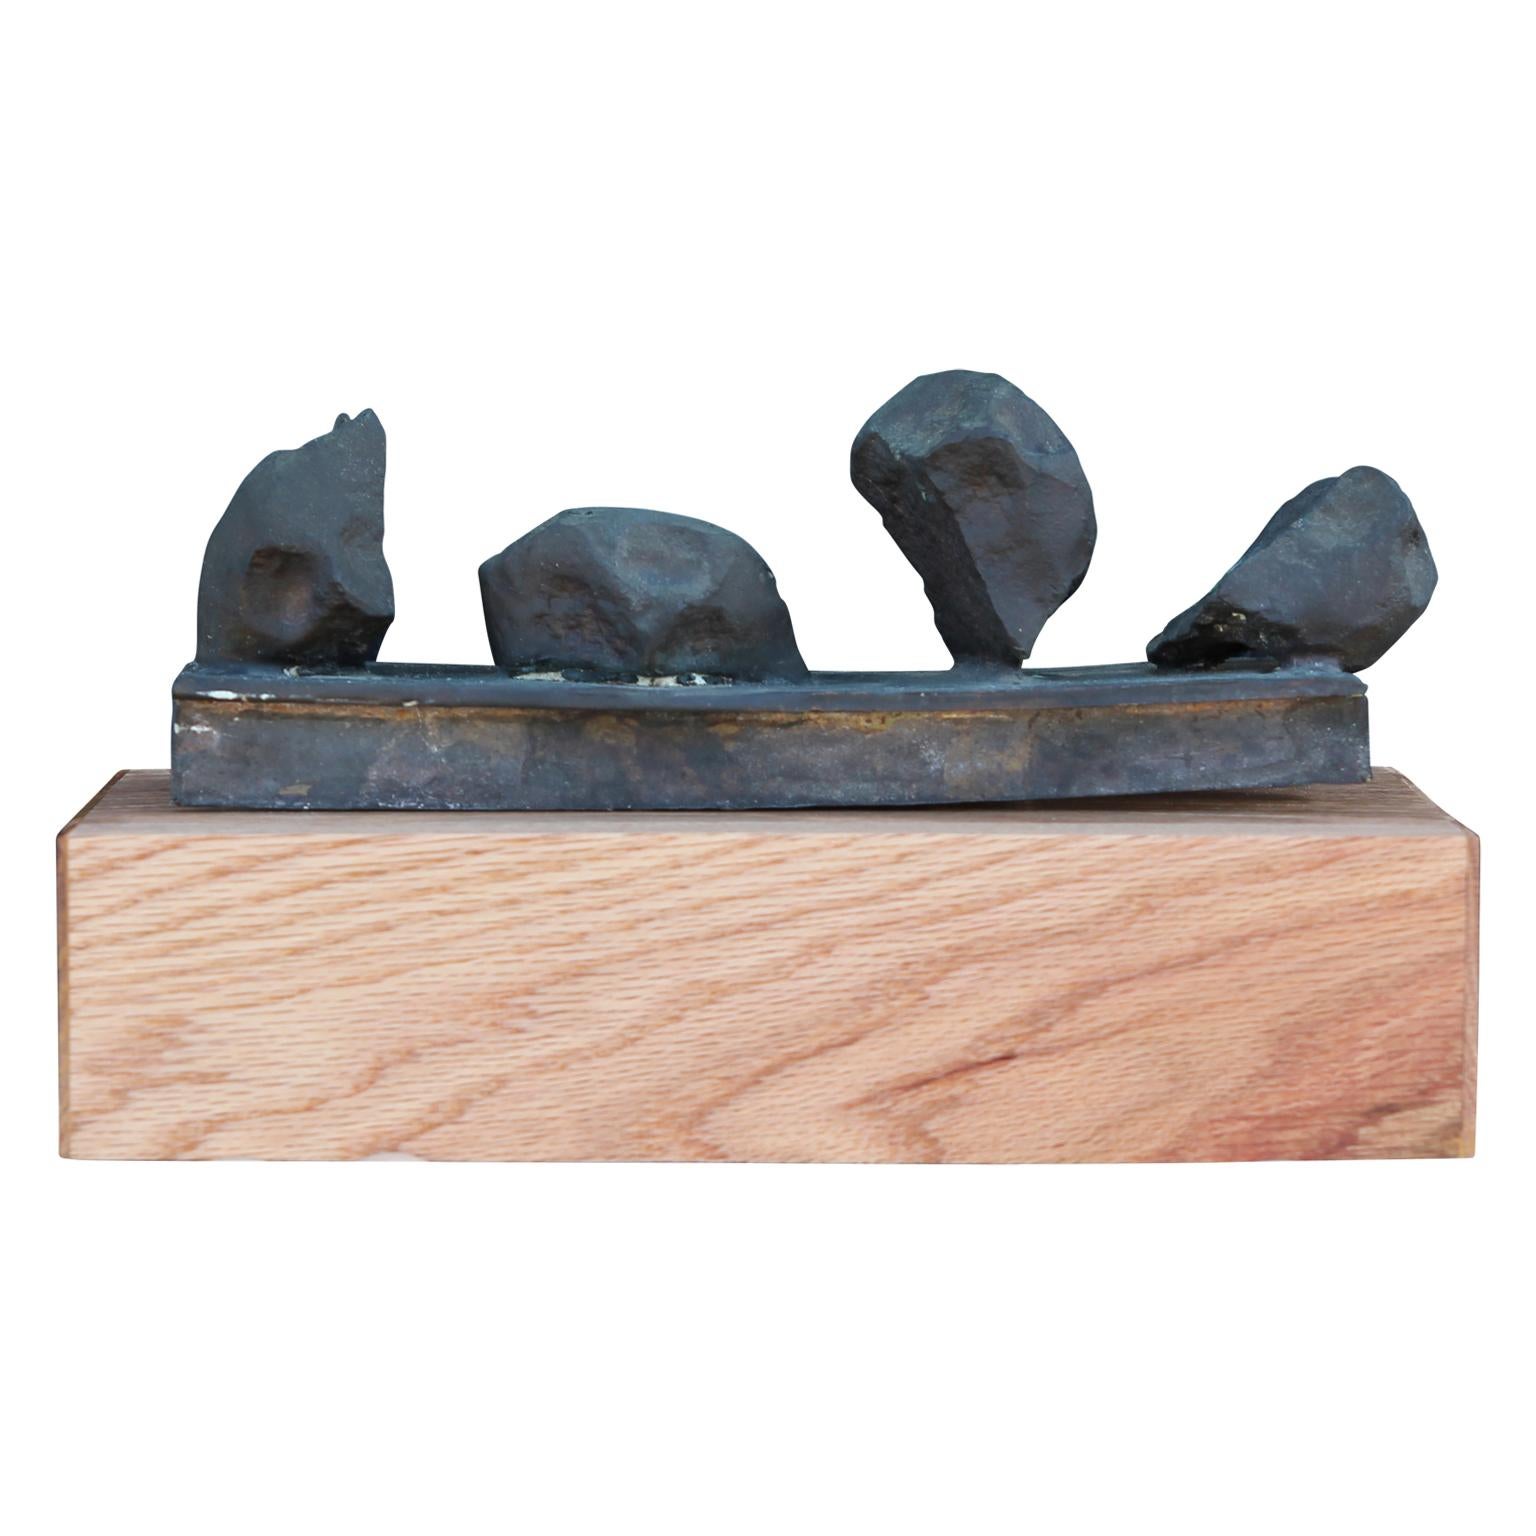 Brutalist bronze sculpture with four organic massed atop a bronze base. The sculpture sits on a hand made wooden base. The work is signed and dated by the artist Rick Pasterchik who was known for abstract sculptures and painting.
Dimensions without